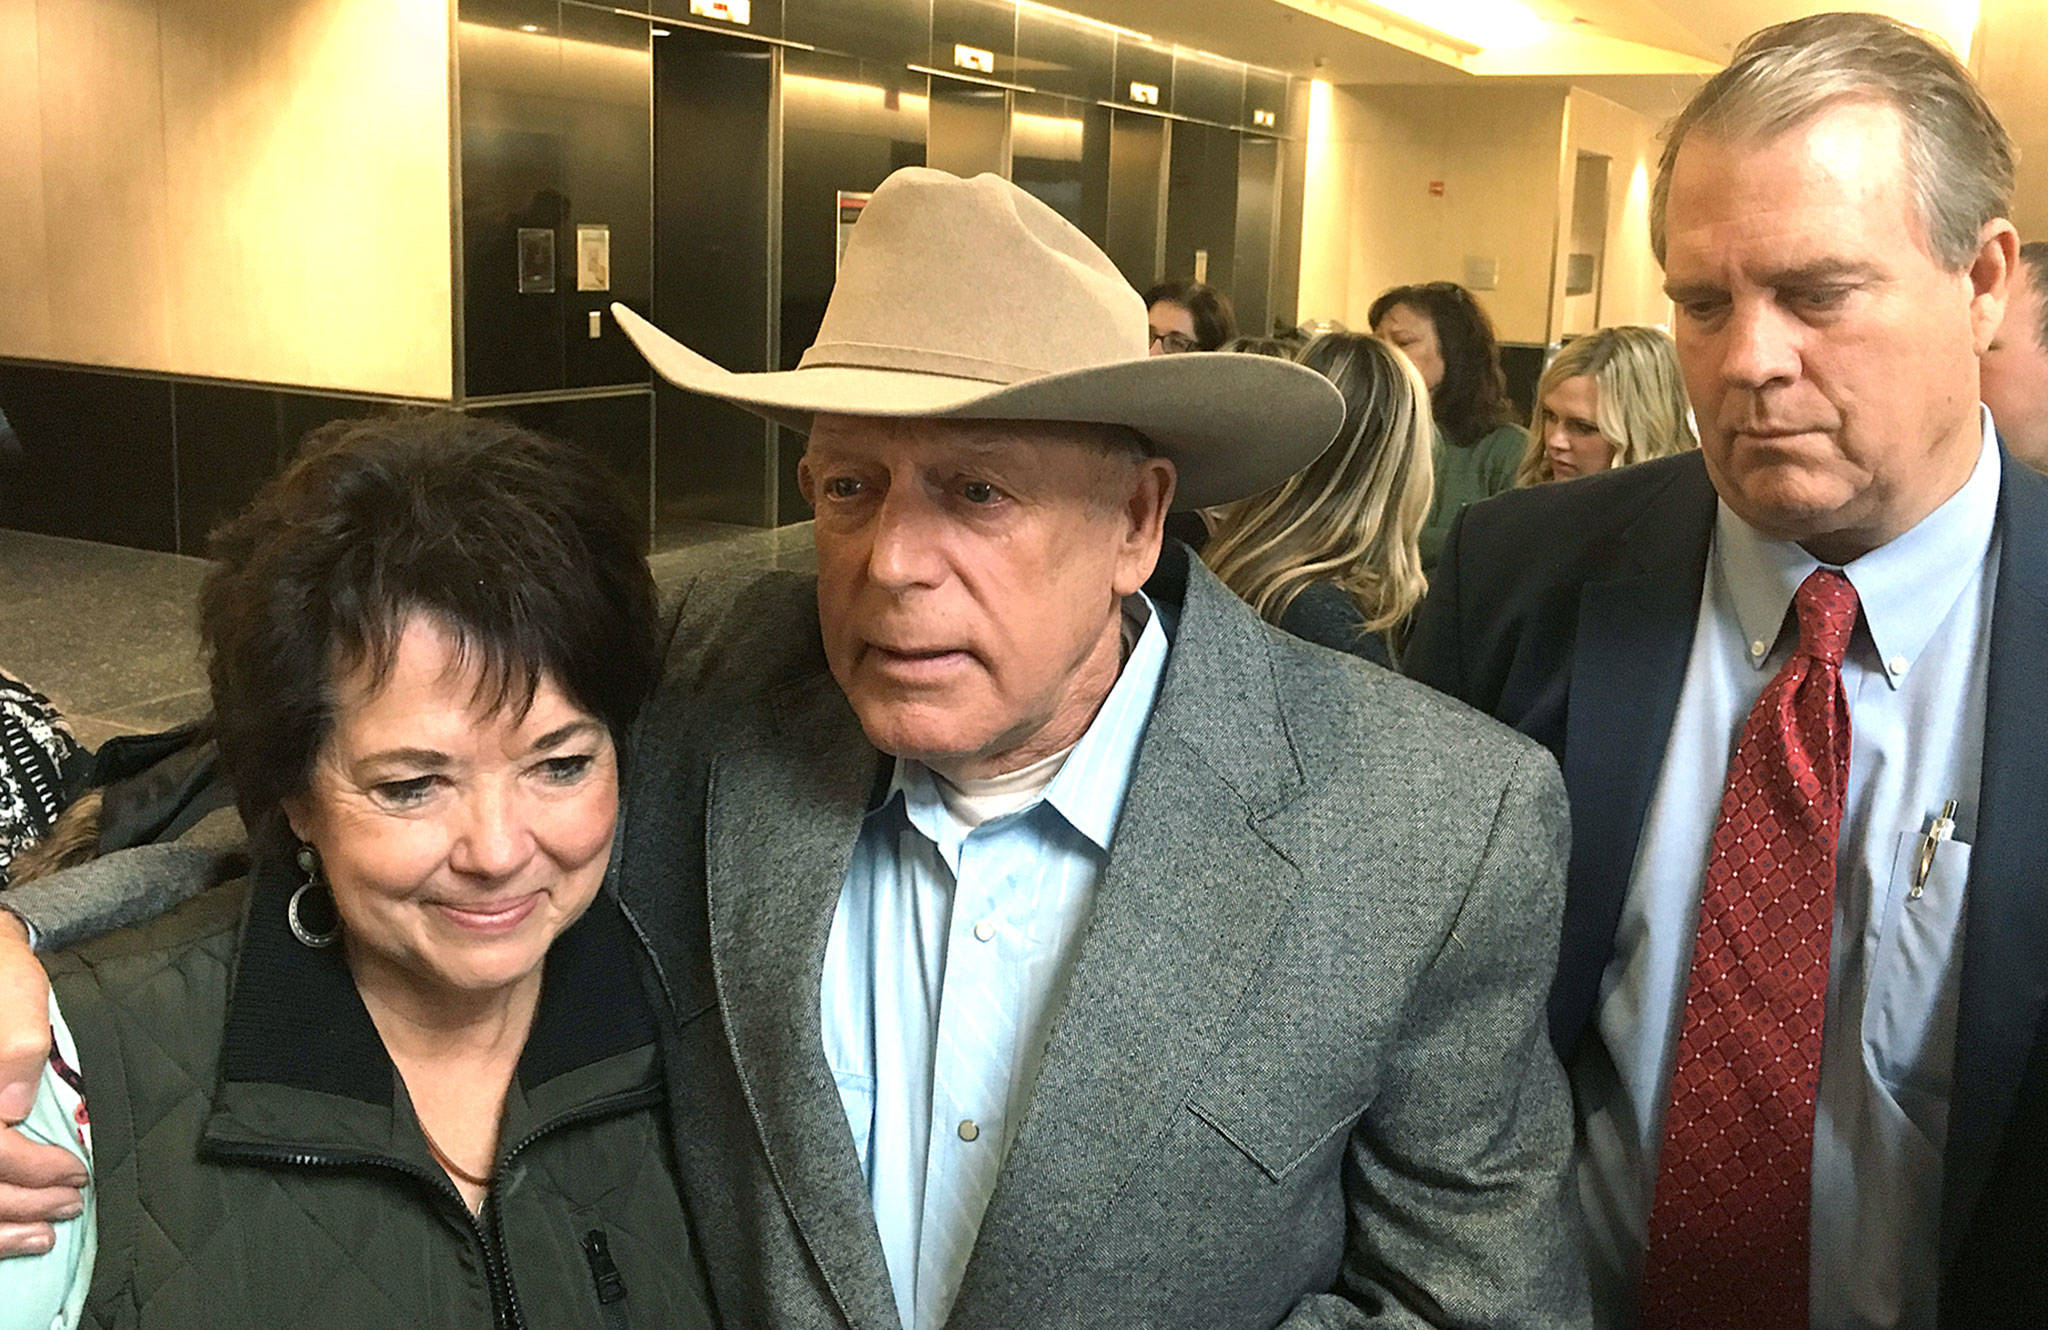 Rancher and states’ rights figure Cliven Bundy (center) emerges from court on Monday a free man, flanked by his wife, Carol Bundy and attorney Bret Whipple, at the U.S. District Court building in Las Vegas. (AP Photo/Ken Ritter)